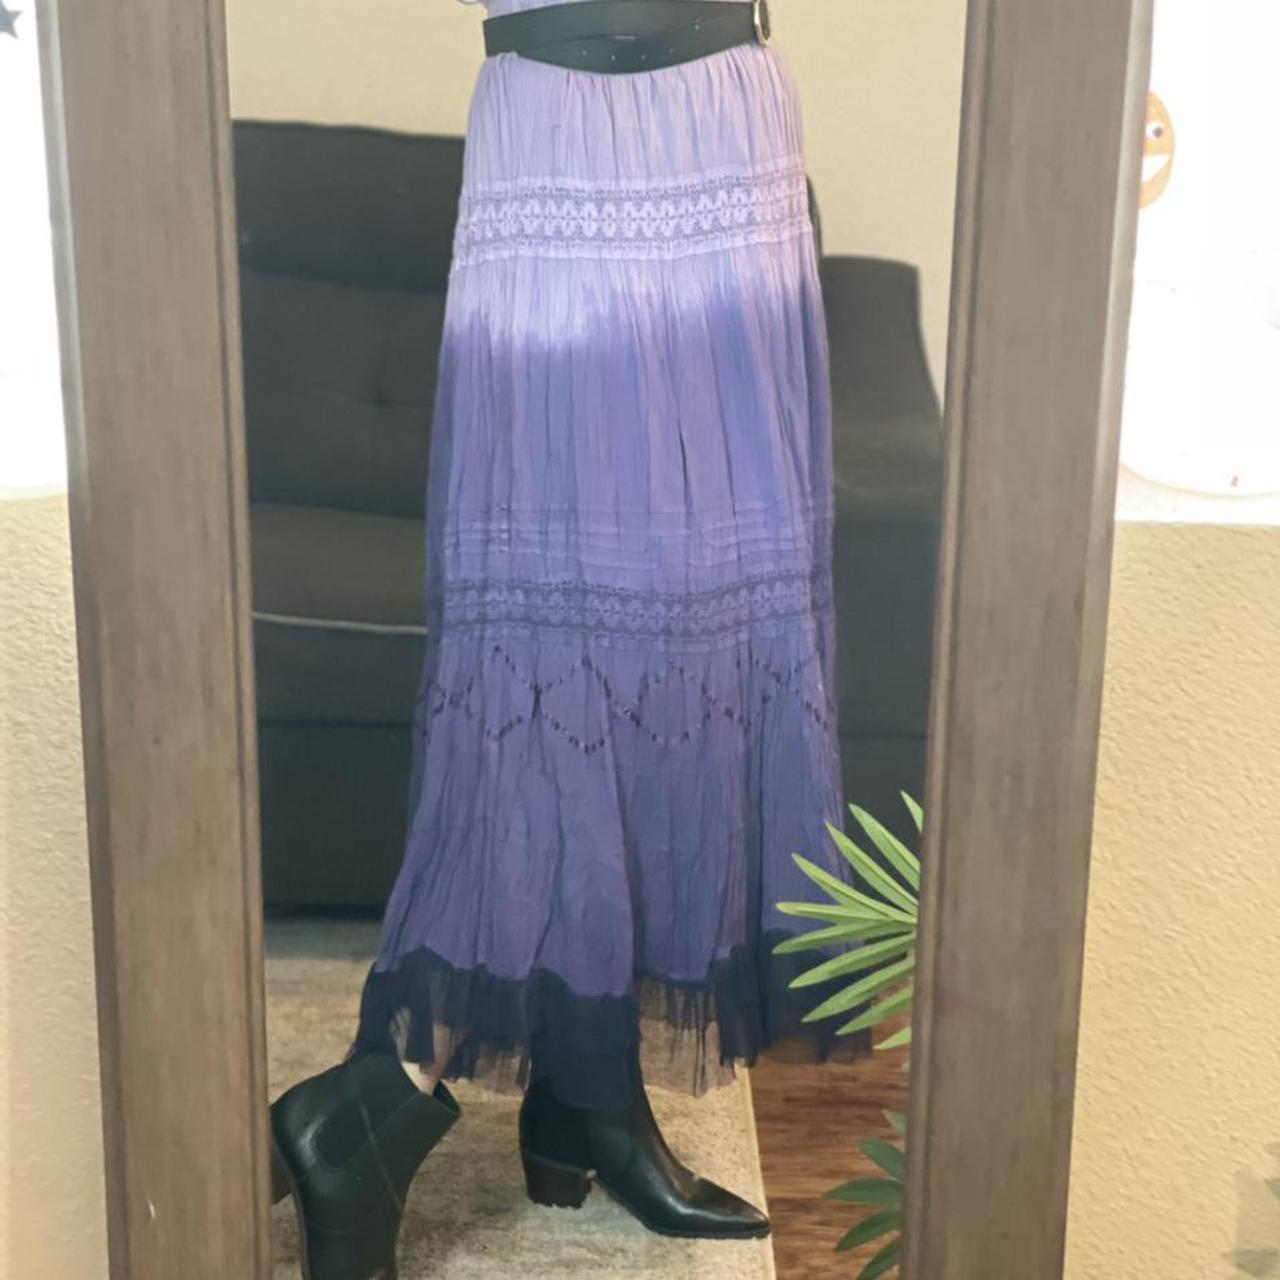 Product Image 2 - Fairy core maxi skirt ✨🦋

Adorable